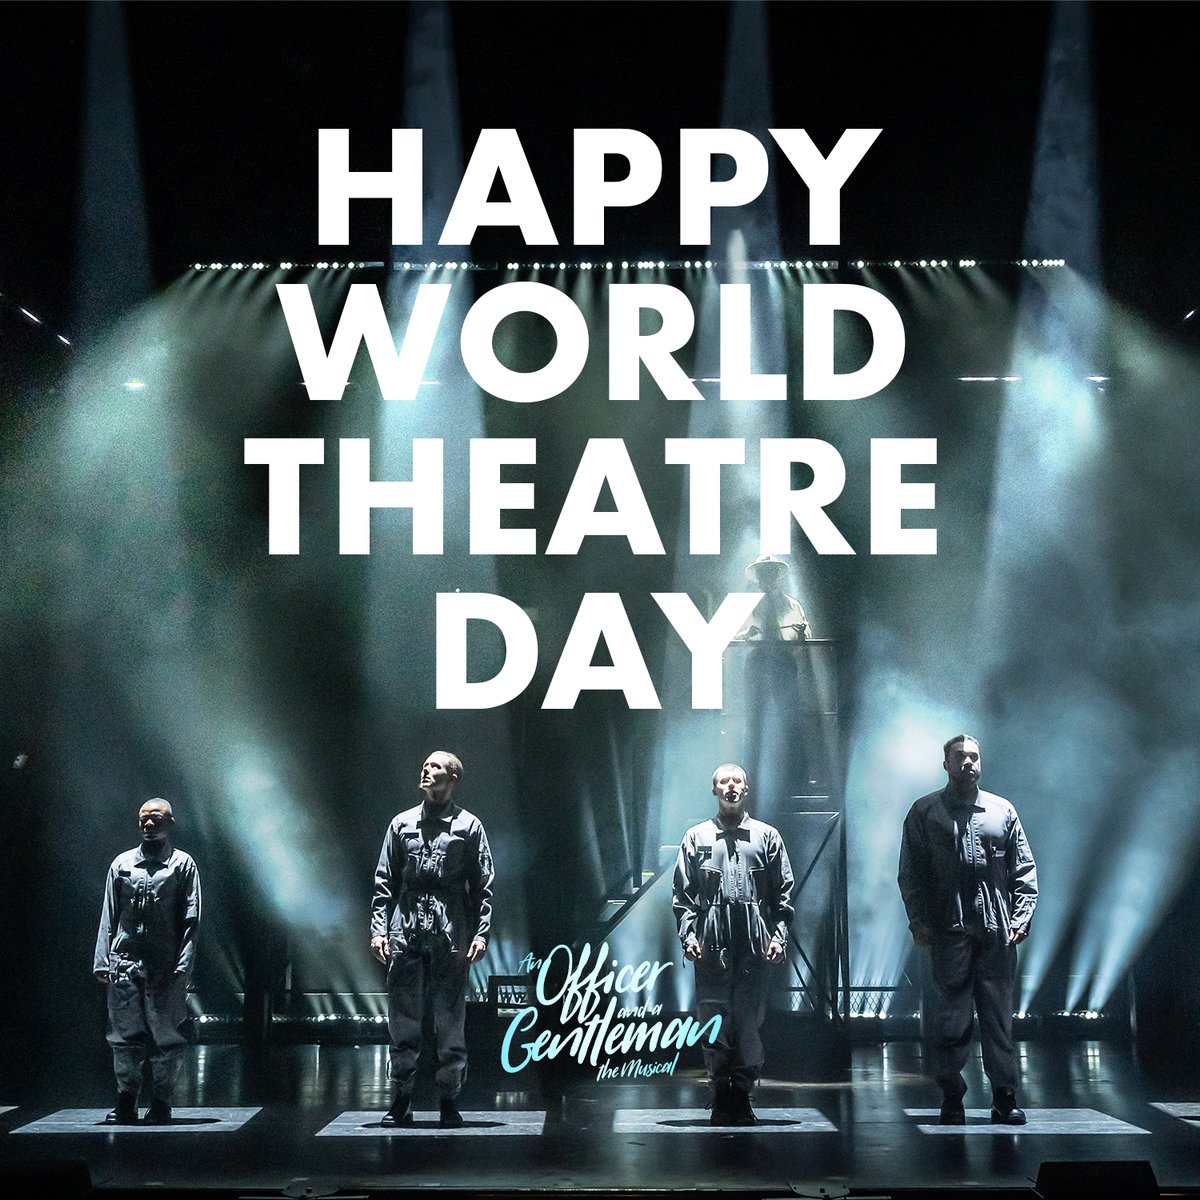 On this #WorldTheatreDay we are saluting our actors, creatives, band, backstage teams, venues and all who have played a part in bringing An Officer and a Gentleman to life on stage this year! 🫡